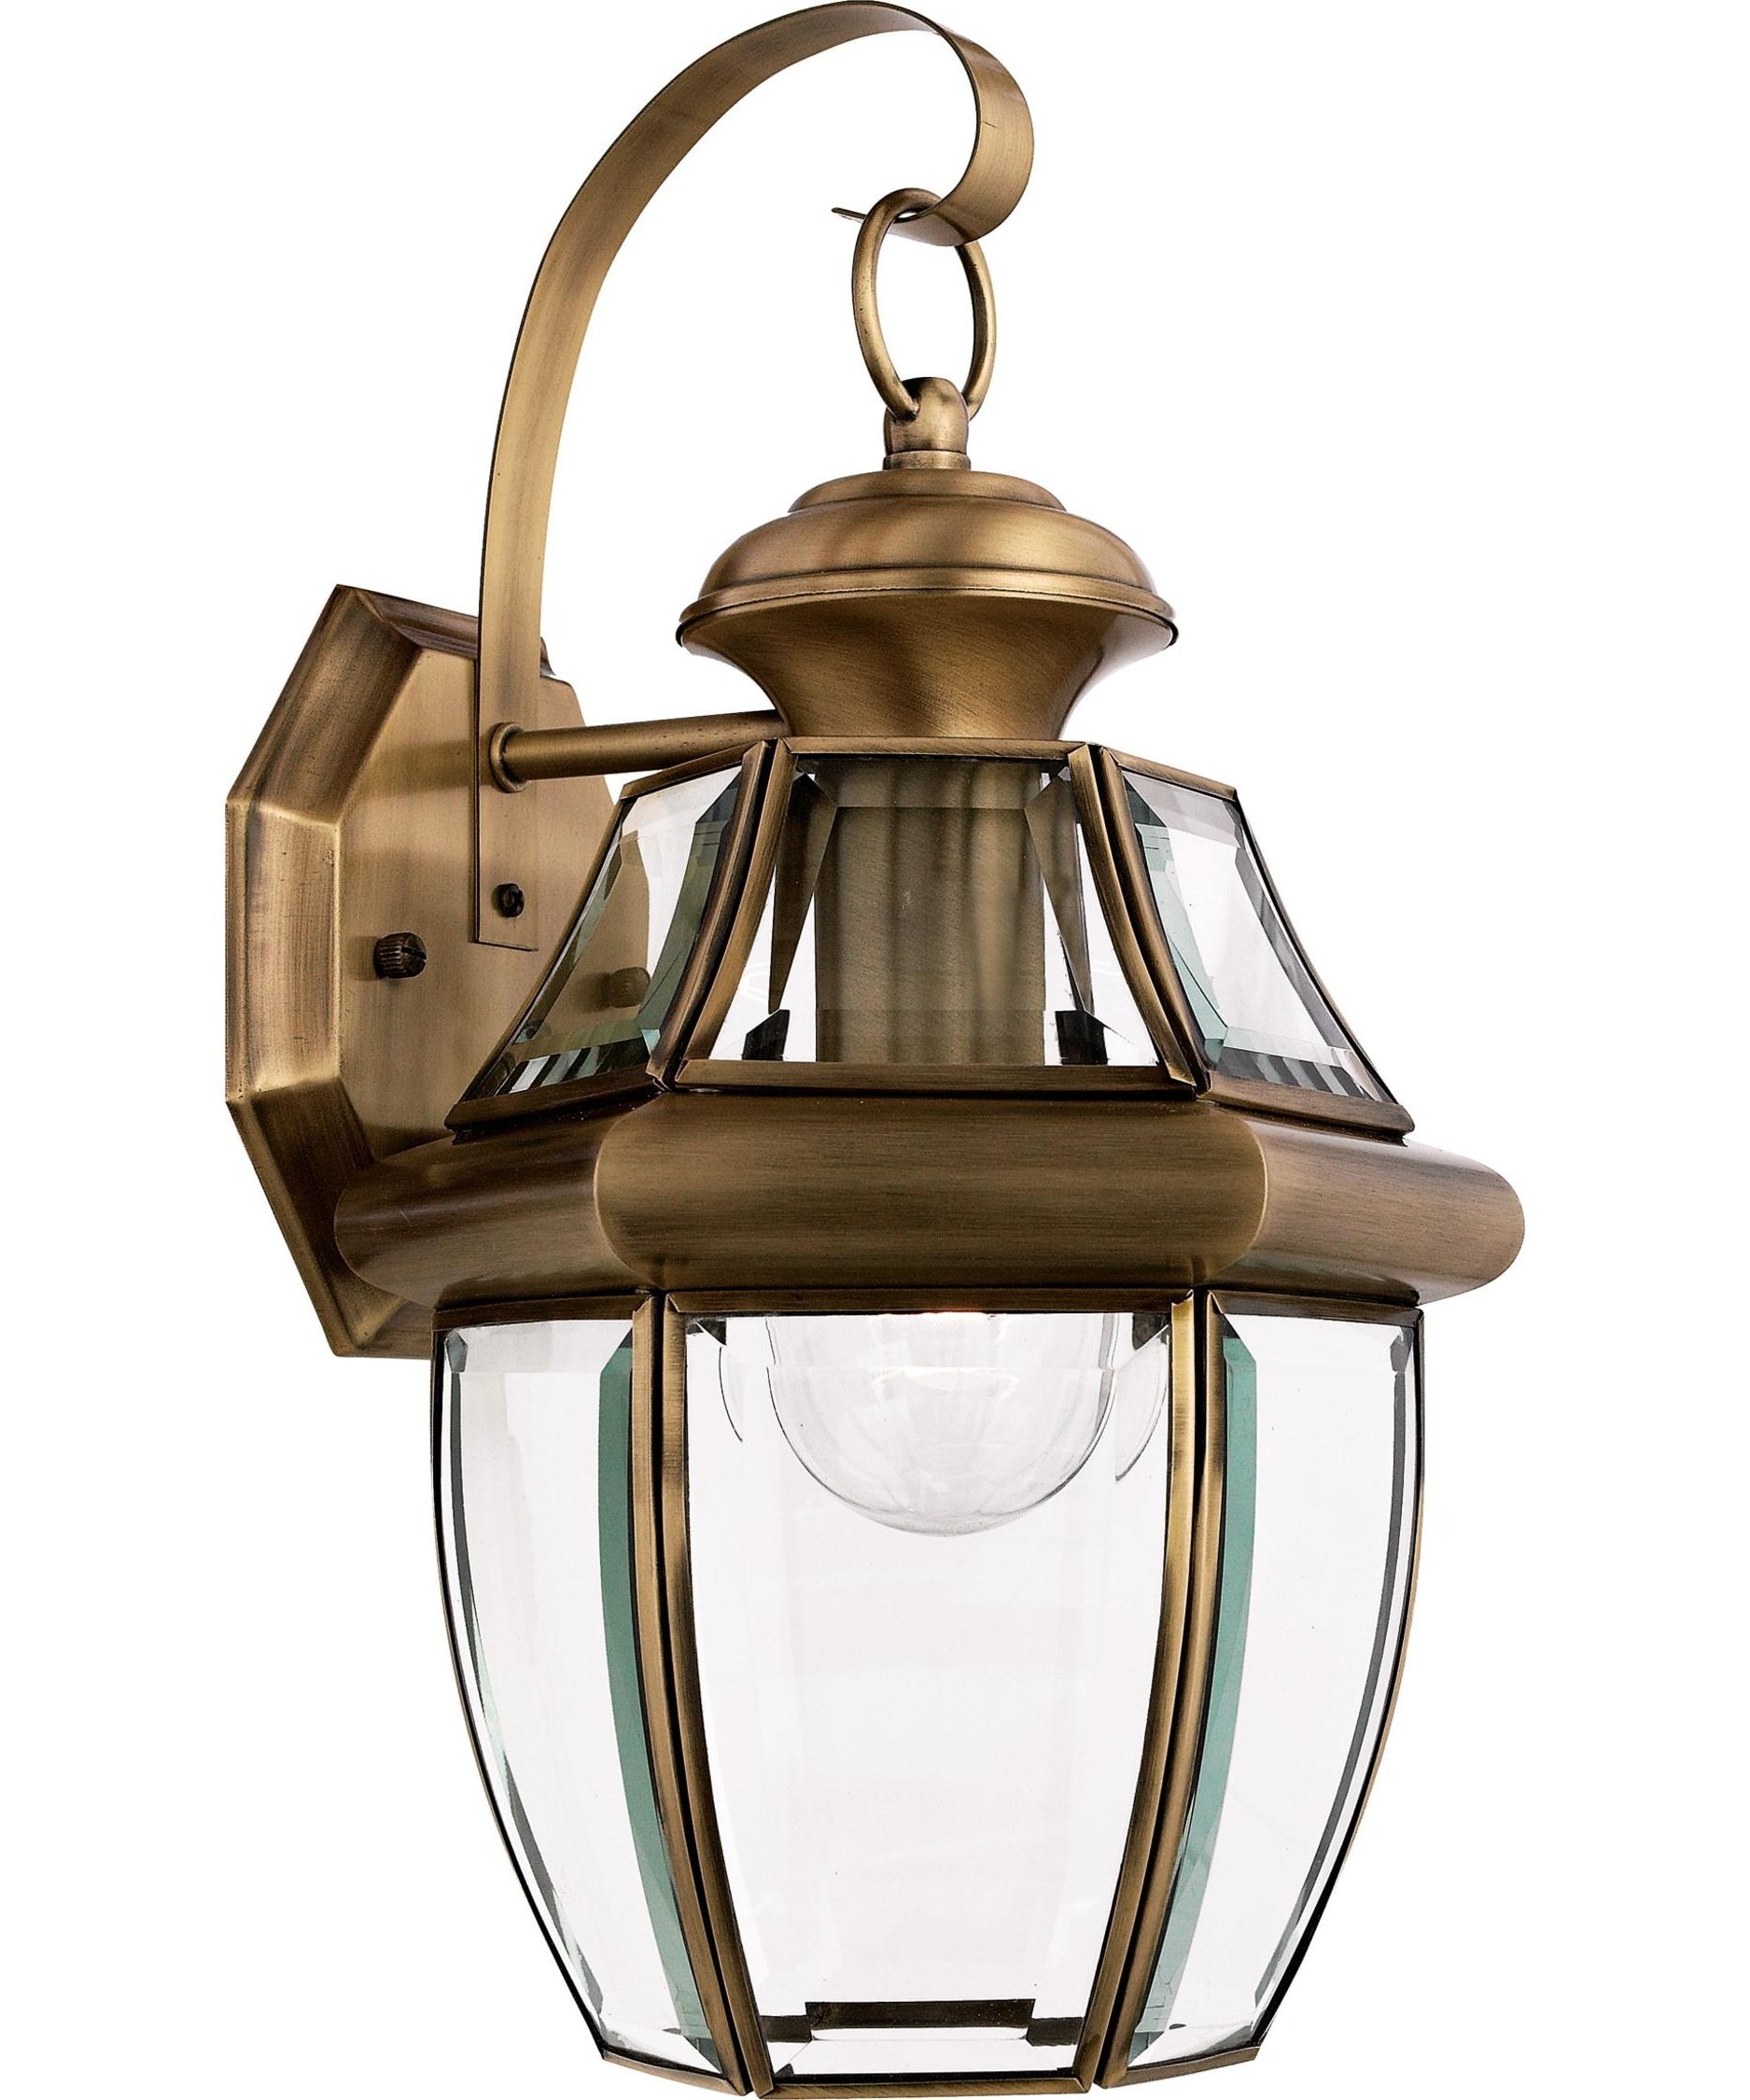 Newest Light : Fresh Antique Brass Outdoor Wall Lights In Solar Uk With Intended For Brass Outdoor Wall Lighting (View 10 of 20)